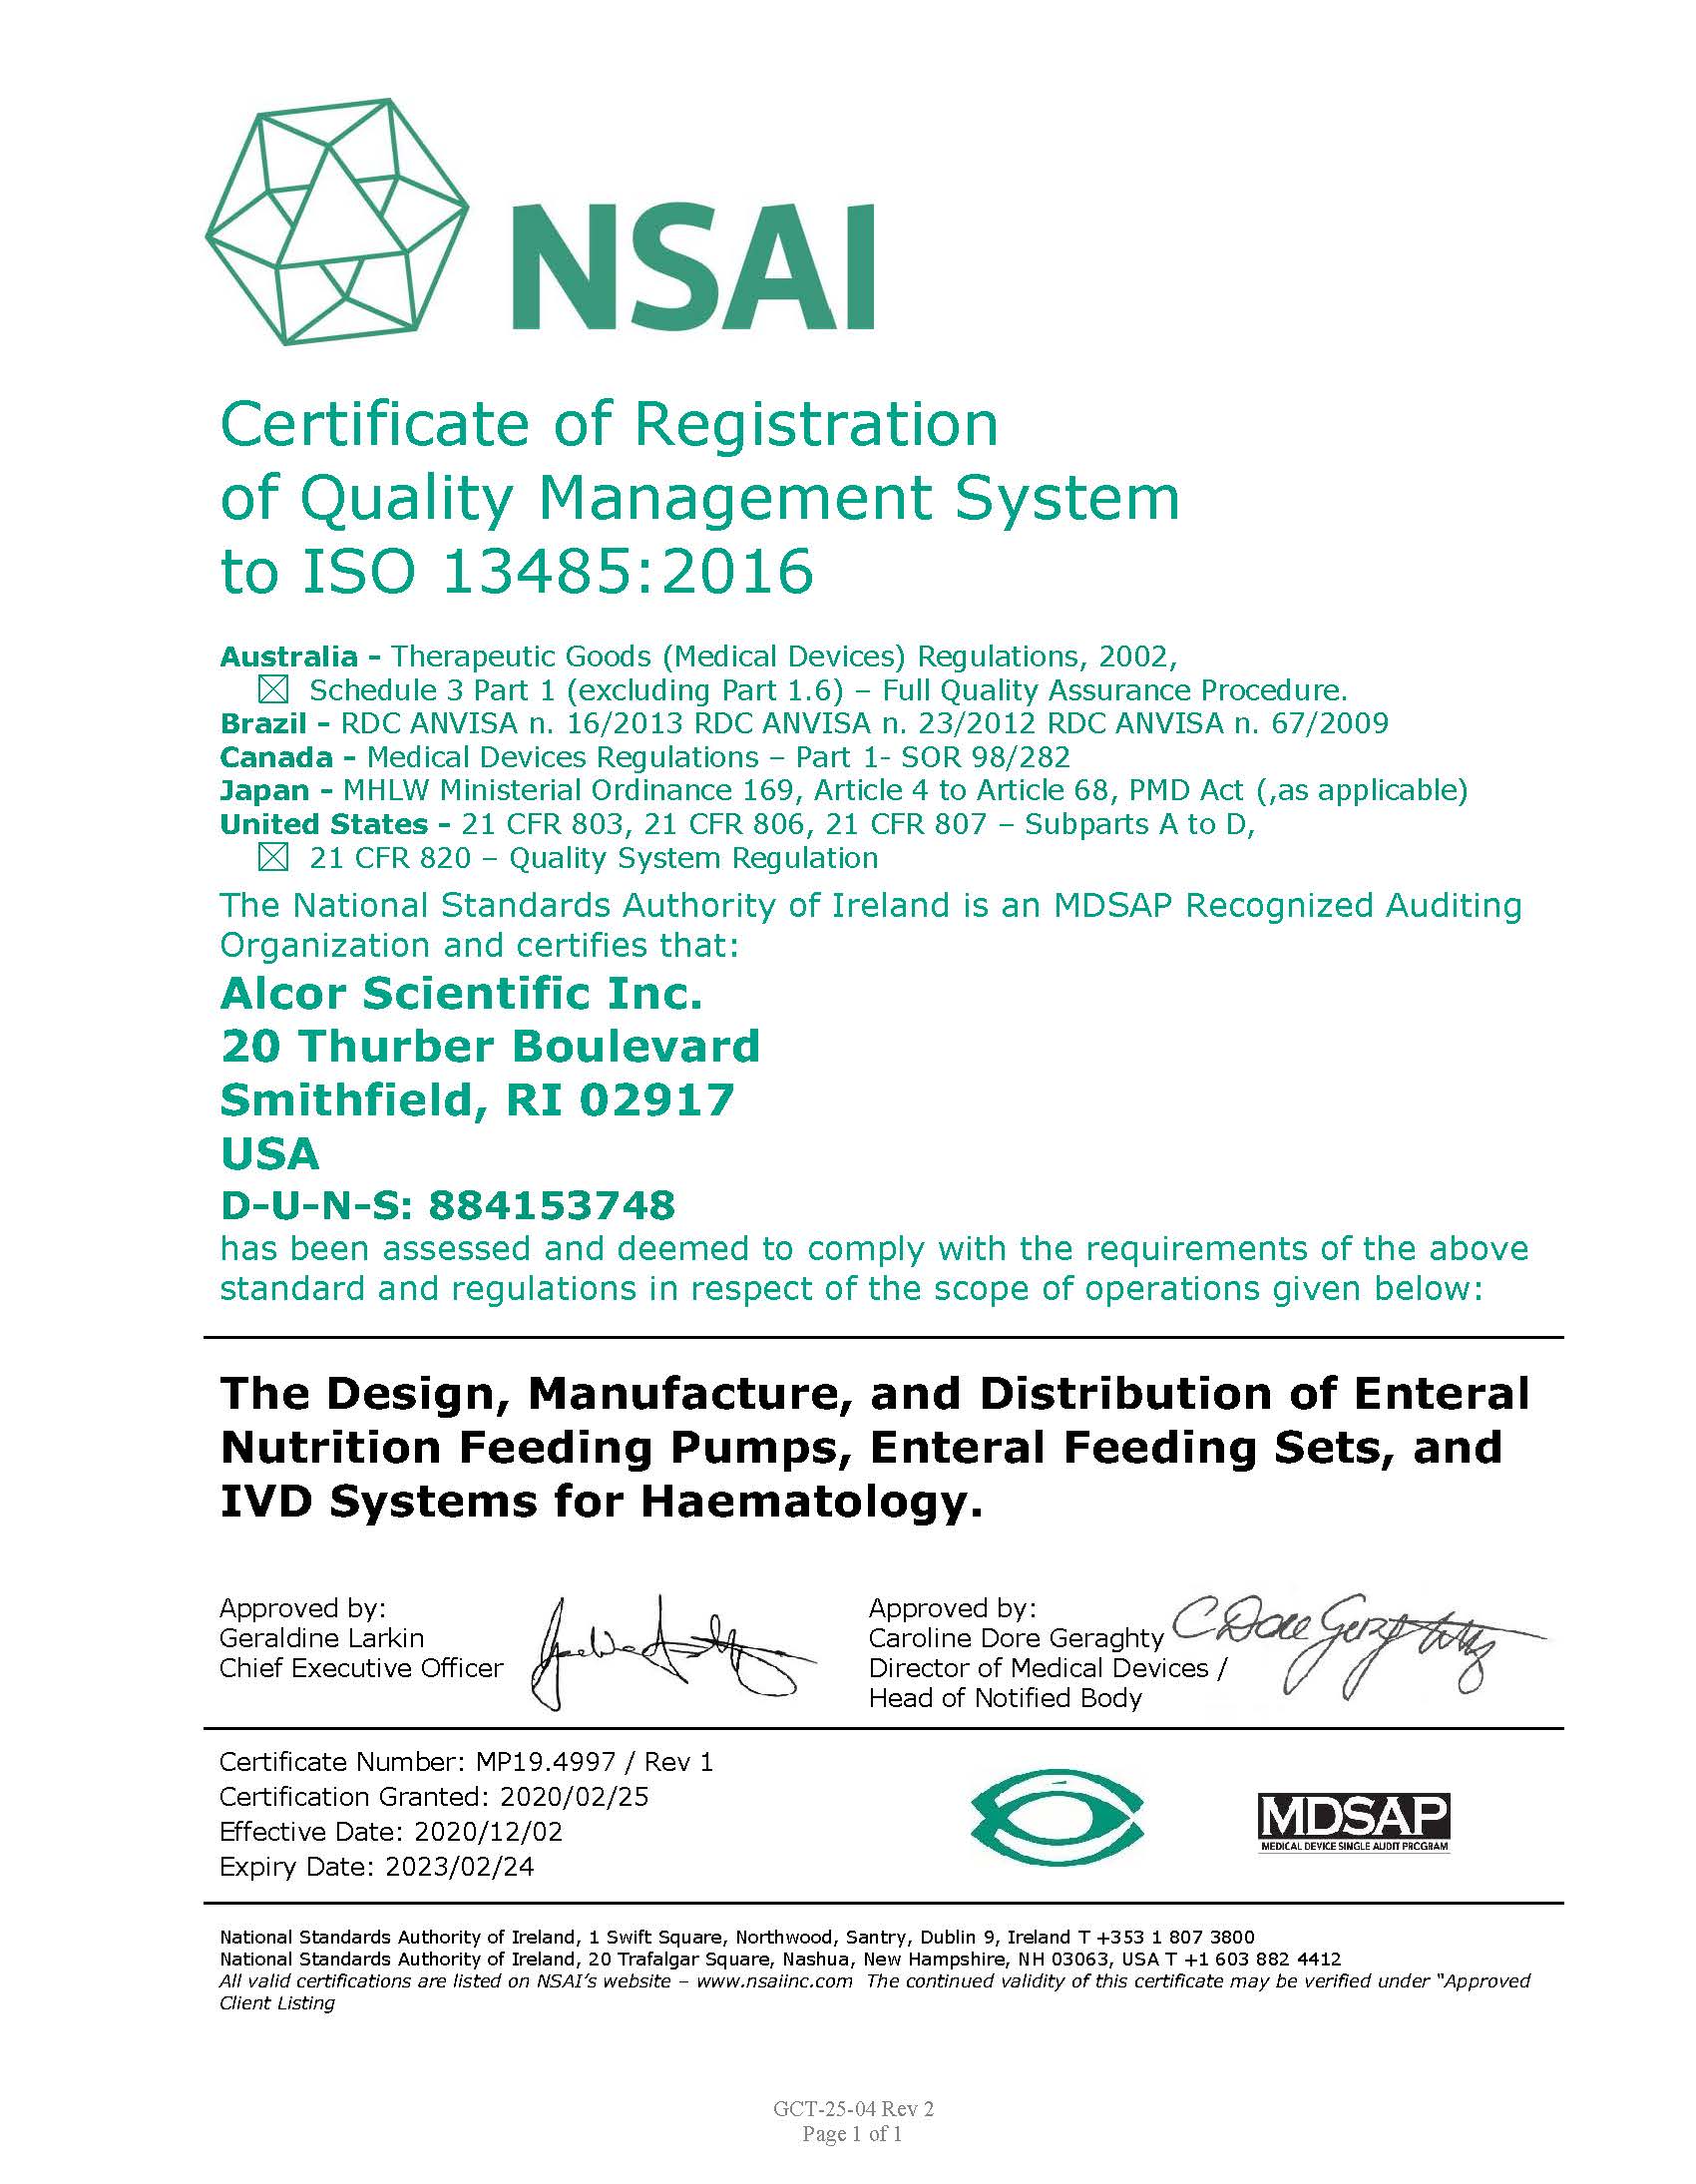 Copy of MP19.4997/Rev 1 Certificate of Registration of Quality Management System to ISO 13485:2016